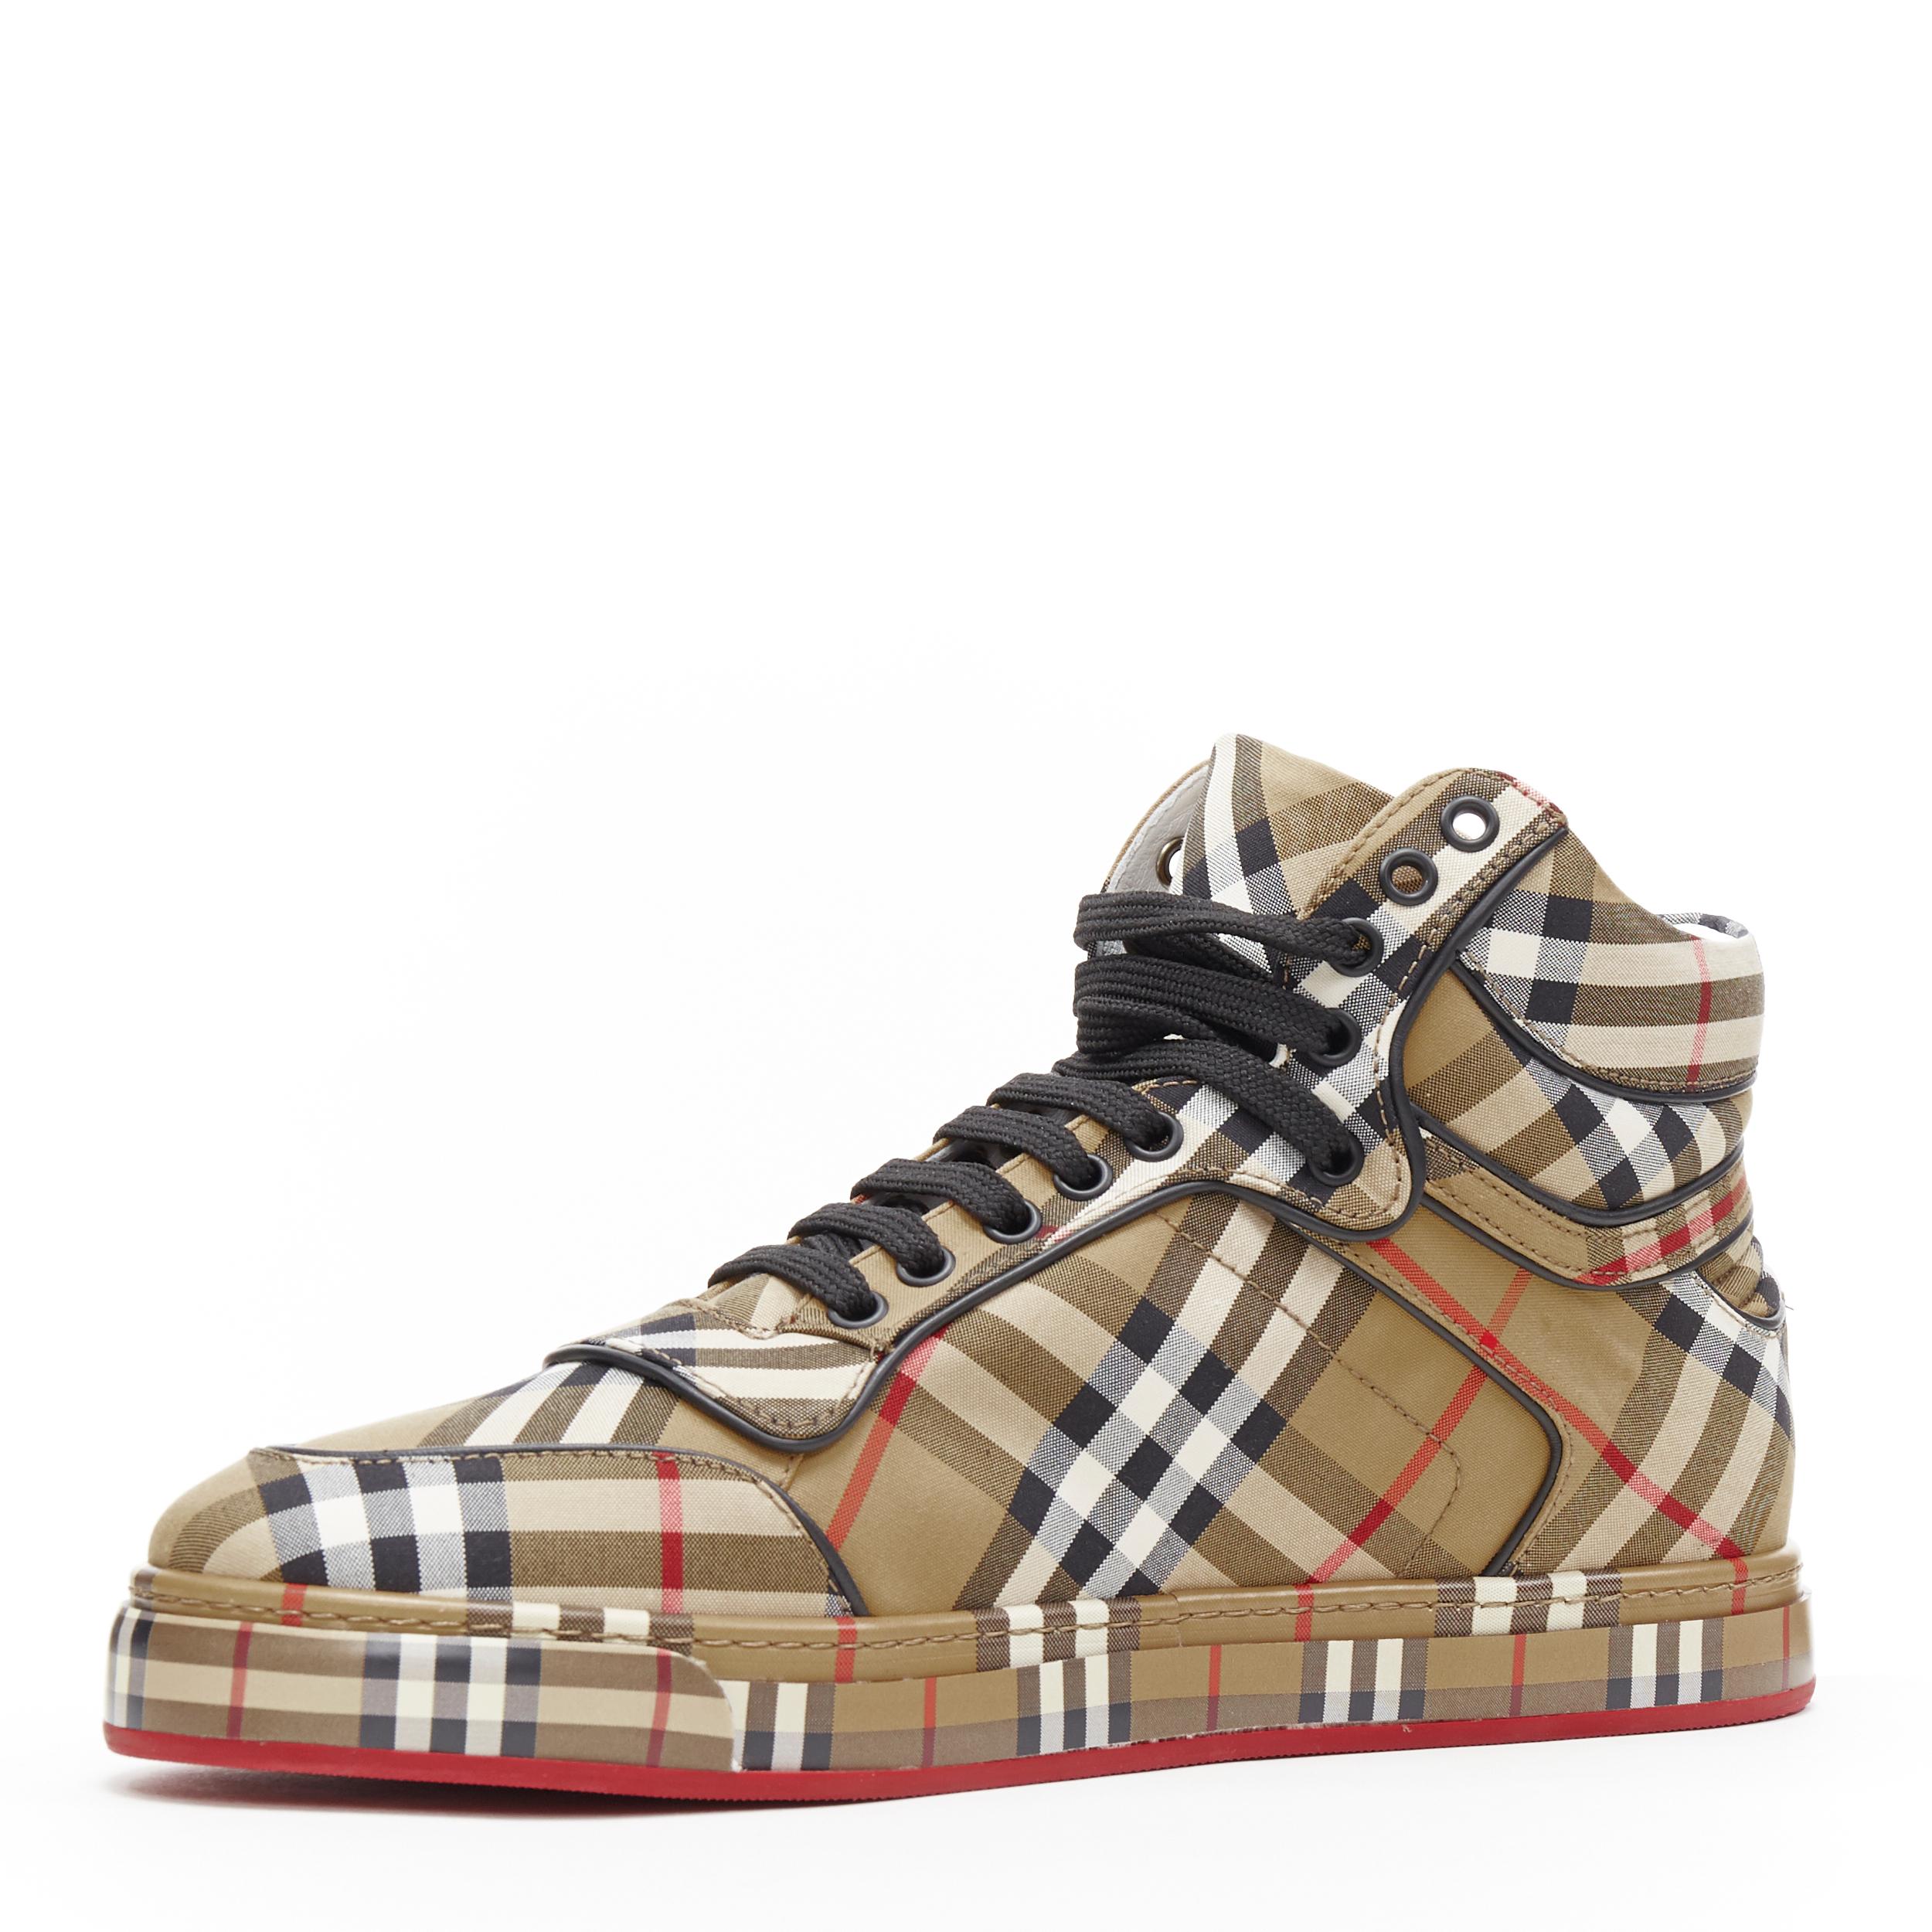 Men's new BURBERRY TISCI Redford Antique Yellow House Check high top sneakers EU42